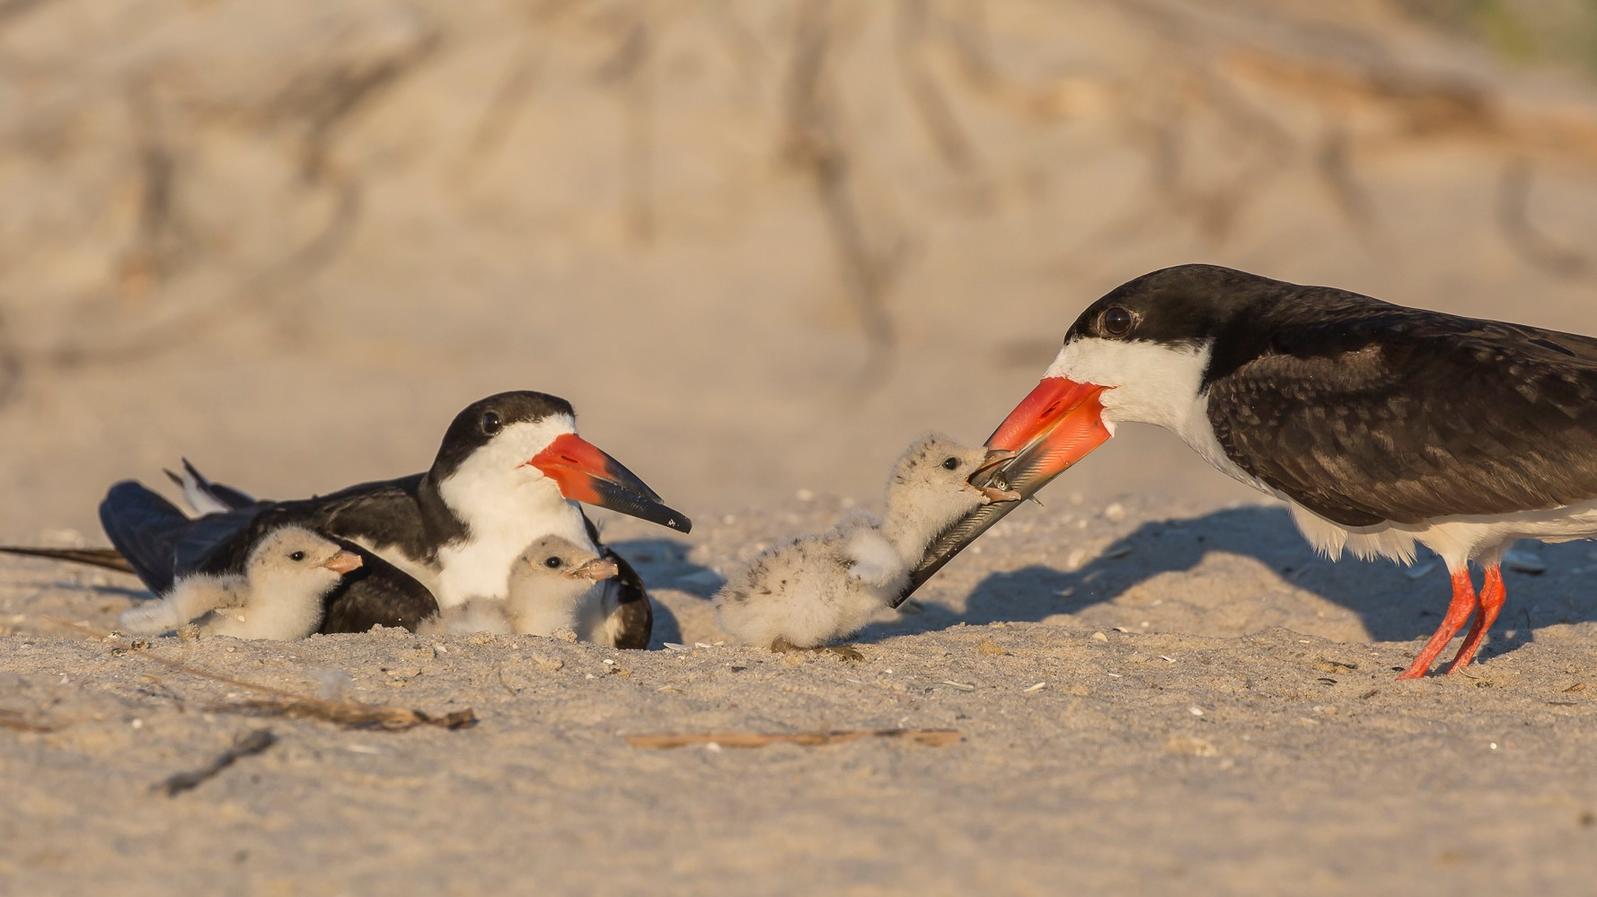 Black Skimmers and chicks.